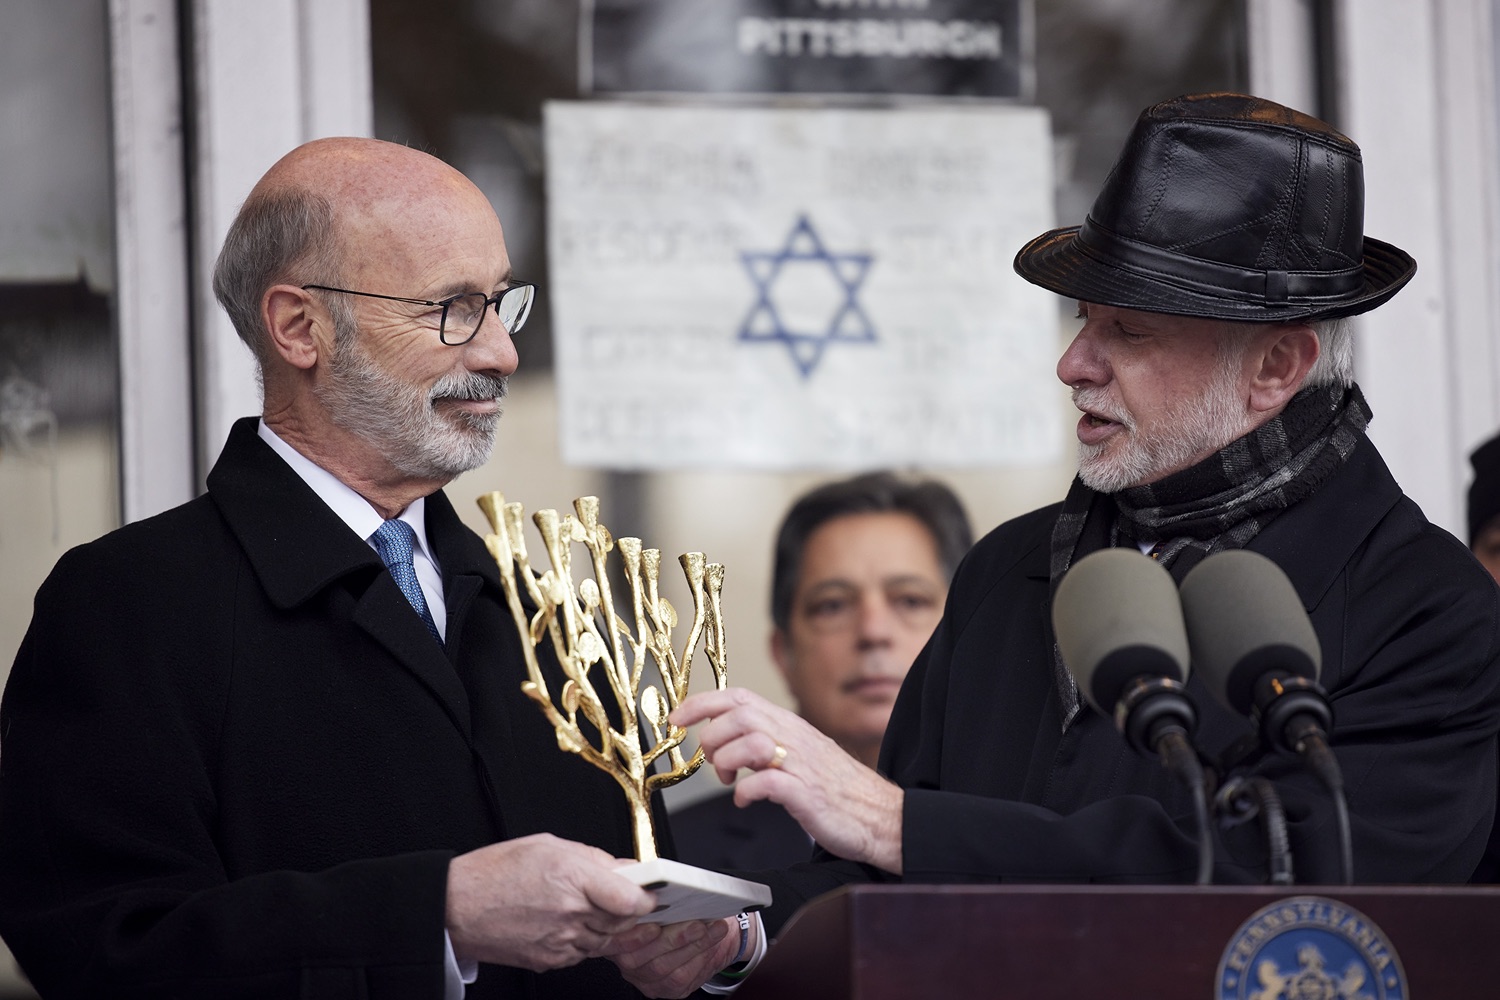 Rabbi Jeffrey Myers presenting a gift to the people of Pennsylvania, a Tree of Life Menorah.  Governor Tom Wolf visited the Tree of Life in Pittsburgh today to announce $6.6 million in state funding to support the rebuilding and reimagining of the synagogue. The governor was joined by Rabbi Jeffrey Myers, Senate Democratic Leader Jay Costa and members of the Tree of Lifes REMEMBER. REBUILD. RENEW campaign which will transform the site of the worst antisemitic attack in U.S. history into a new place of hope, remembrance, and education. Pittsburgh, PA - December 6, 2021<br><a href="https://filesource.amperwave.net/commonwealthofpa/photo/20308_gov_treeOfLife_dz_021_copy.jpg" target="_blank">⇣ Download Photo</a>